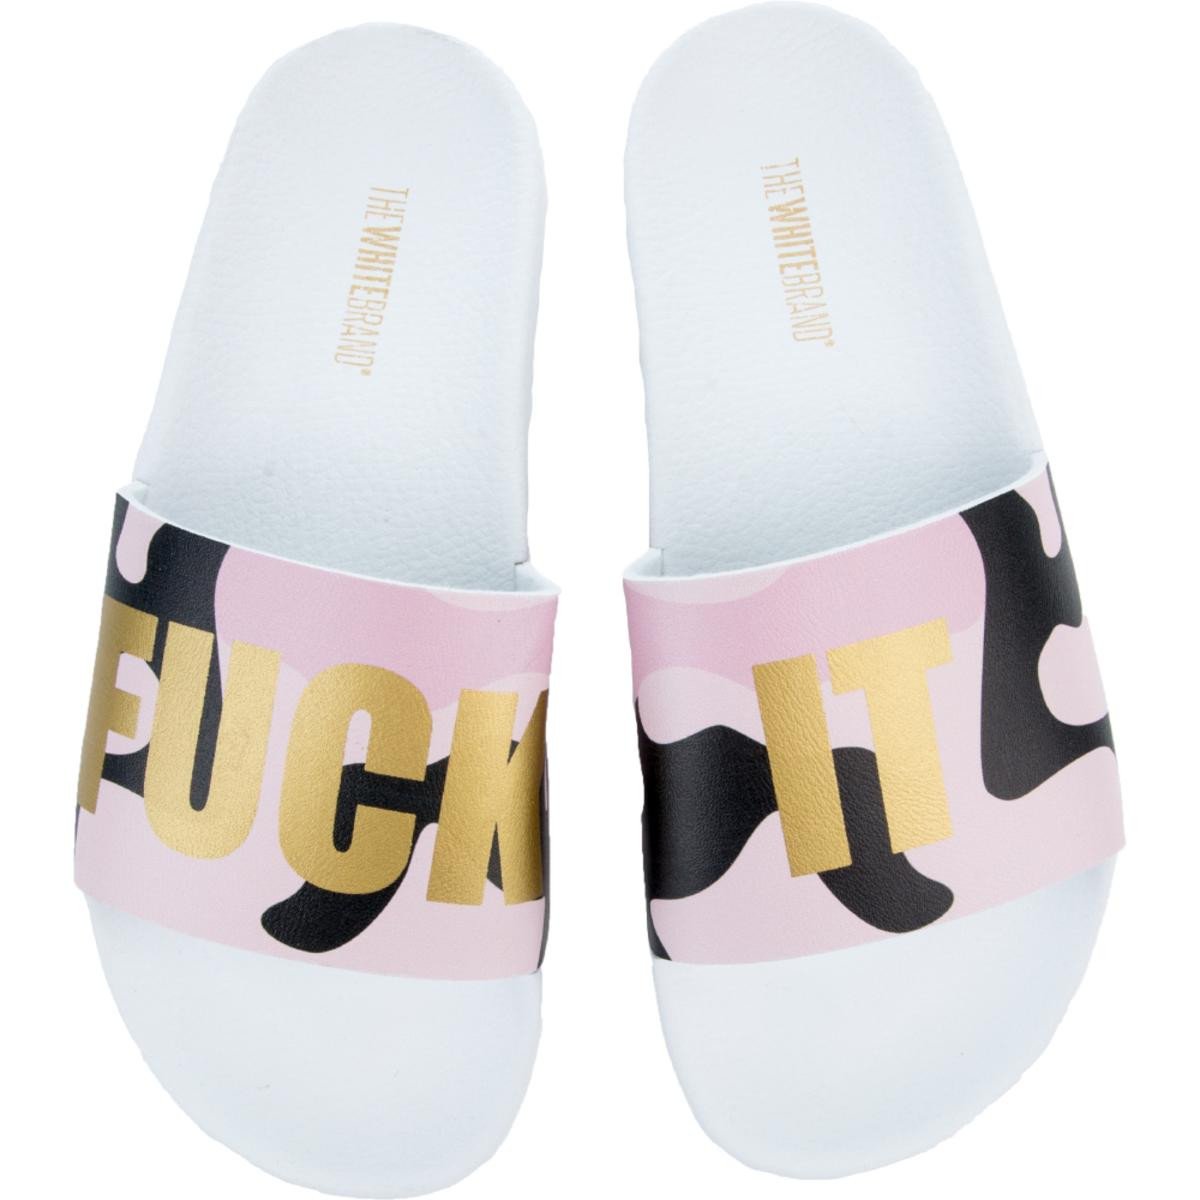 Fuck It Sandals in White and Pink Pink/White